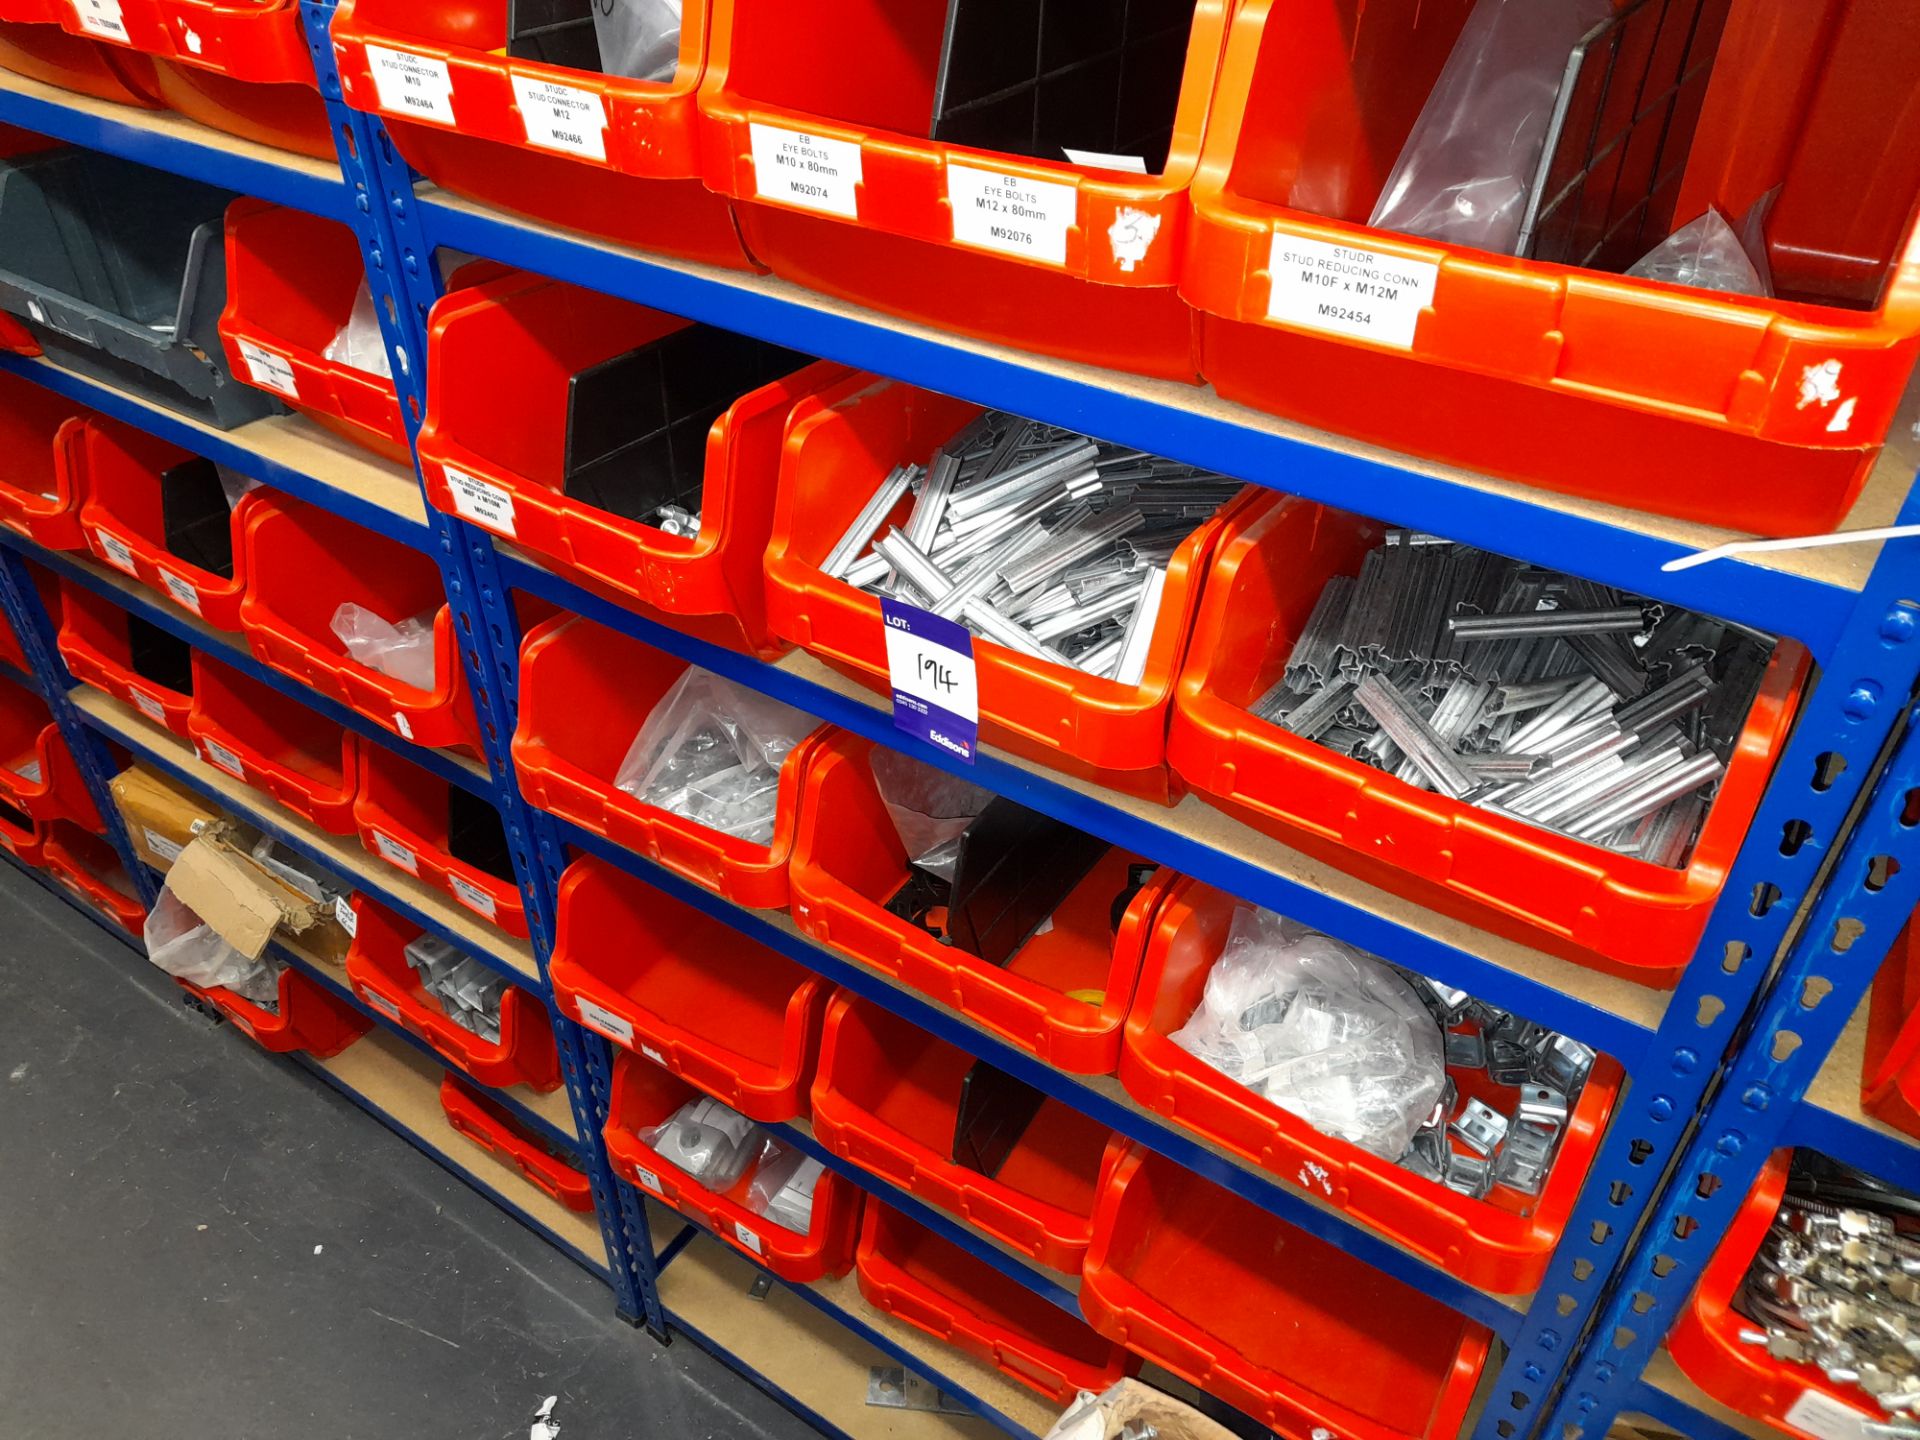 Large Quantity of stock to 13 bays, bolts, nuts, clamps, bracketry, fittings, washers, plastic - Image 25 of 41